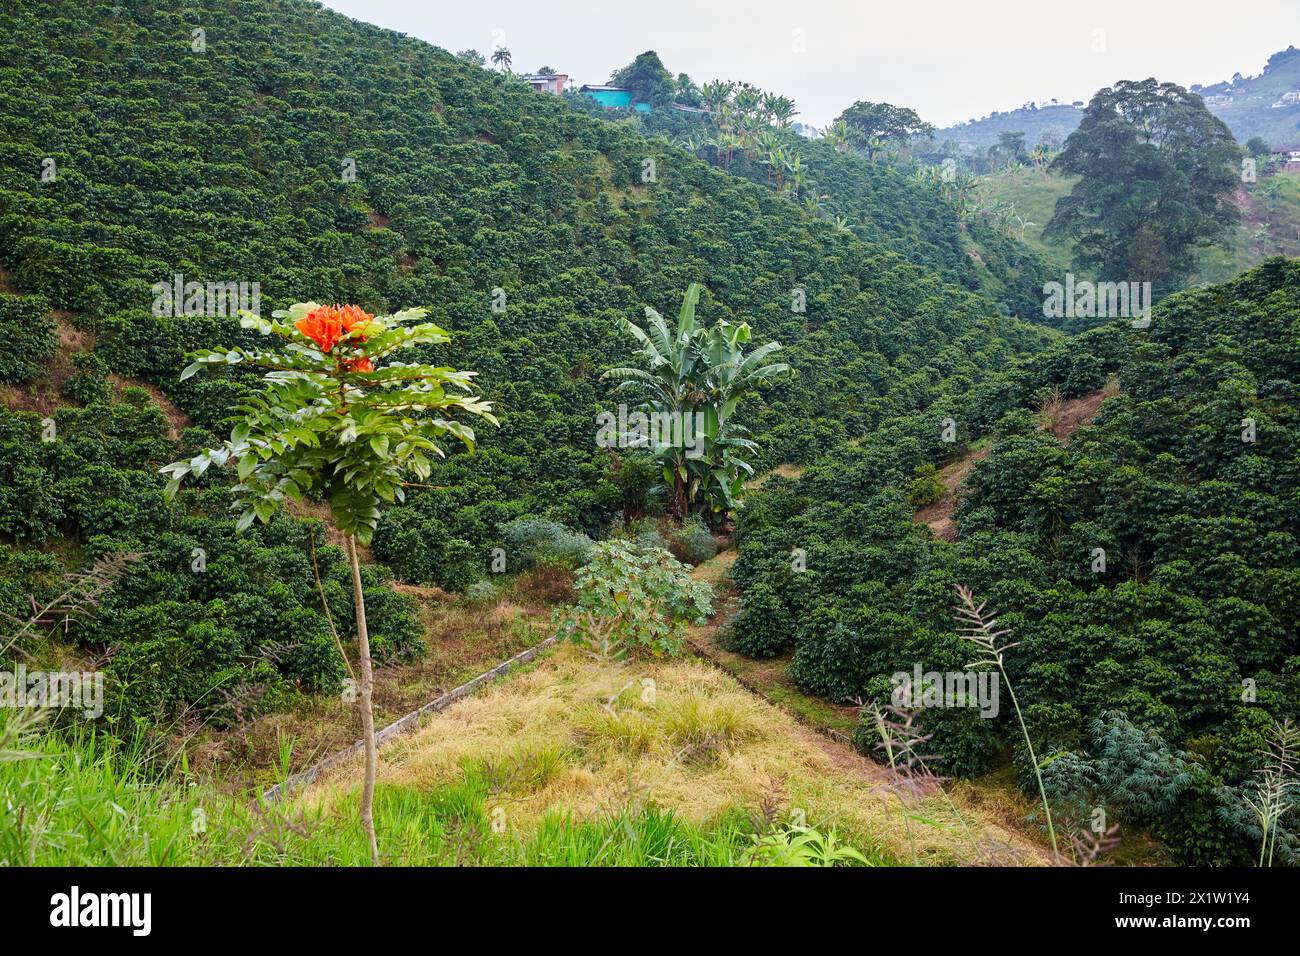 African tulip, Cafetales, Coffee plantations, Coffee Cultural Landscape, Quindio, Colombia, South America. Stock Photo